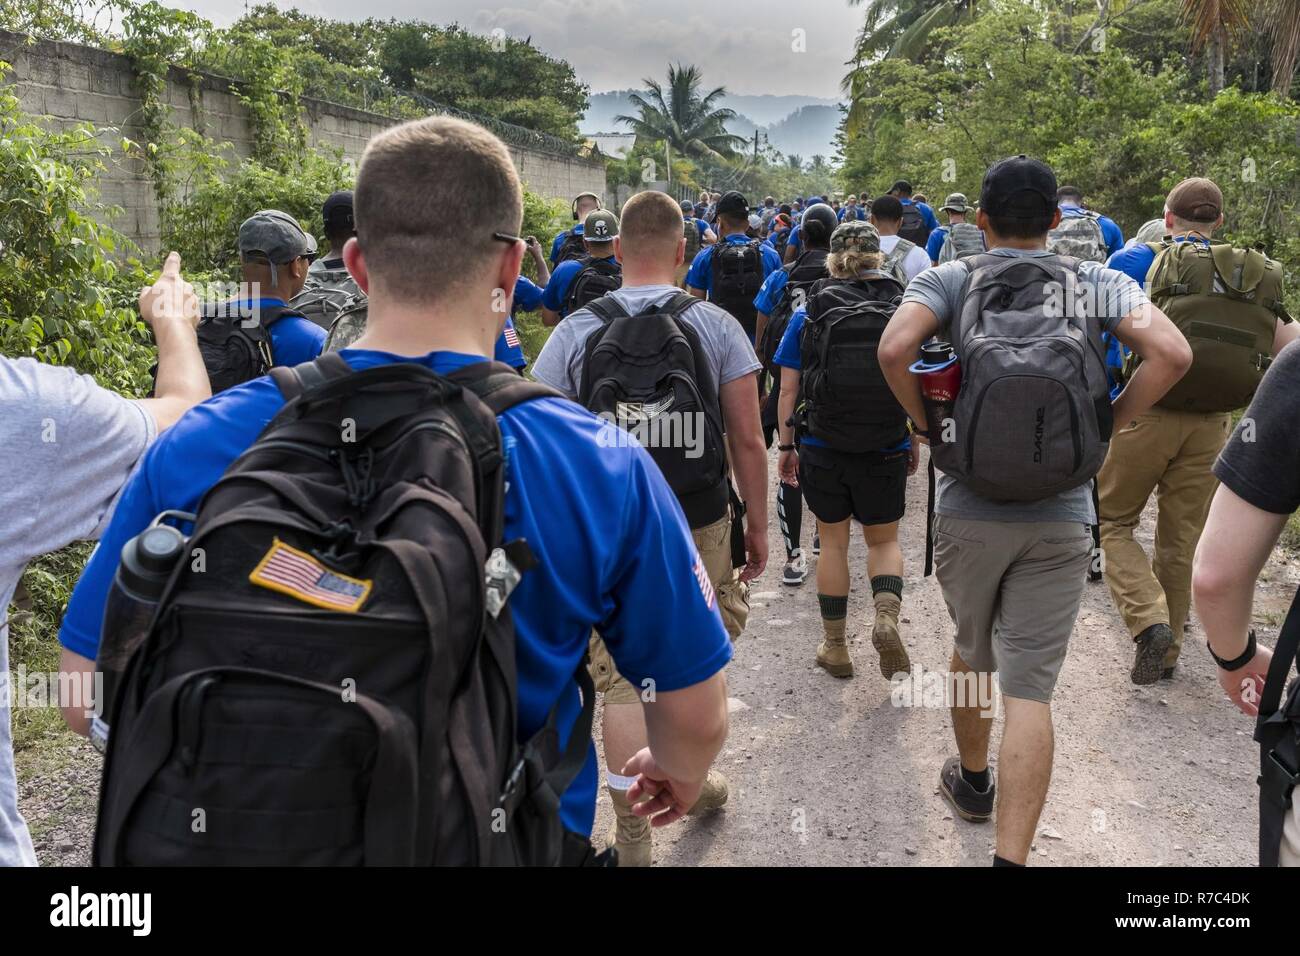 More than 190 members of Joint Task Force-Bravo hiked approximately 3.6 miles round-trip to the village of San Jerónimo, Comayagua, Honduras, Apr. 29, 2017. Members carried more than 5025 lbs of food and supplies, 24 soccer balls and 3 piñatas to the people of San Jerónimo. Chapel hikes have been occurring since 2003, with the JTF-Bravo Chapel sponsoring an average of six every year. The hikes are designed to provide a practical way for JTF-Bravo members to engage and partner with local communities to provide support to surrounding villages in need of food and supplies. Stock Photo